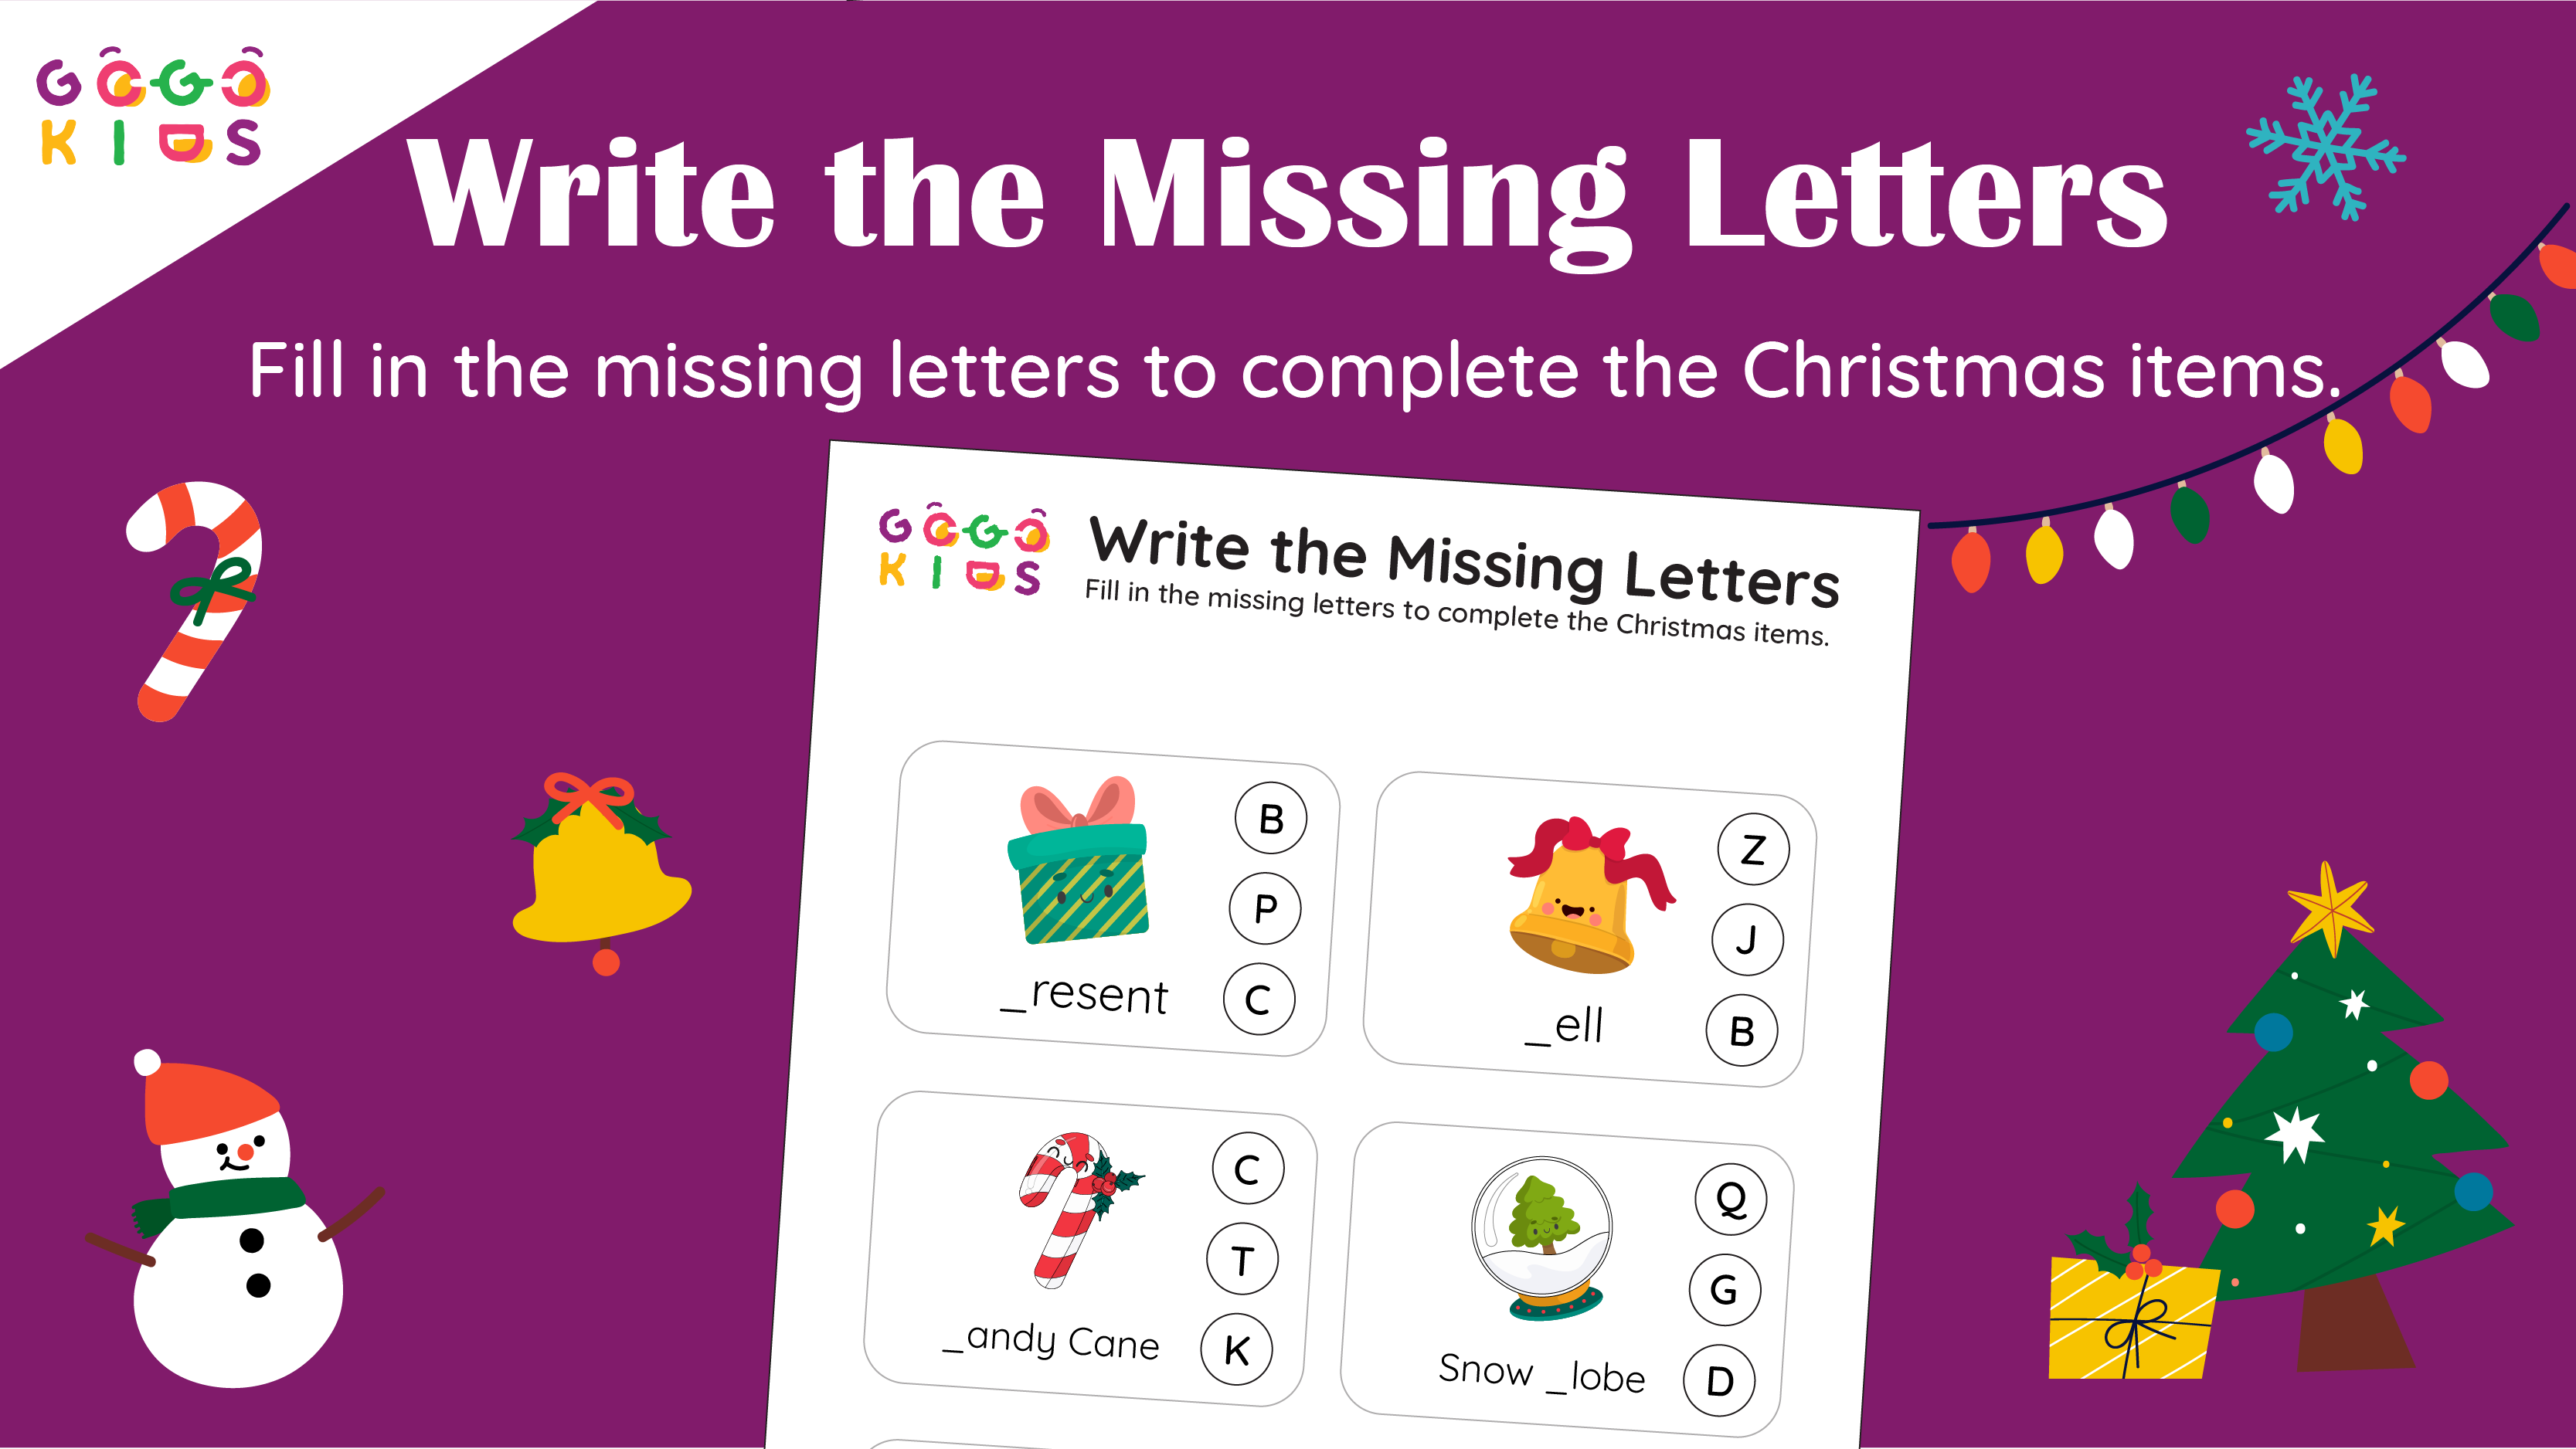 Words and Numbers: Write the Missing Letters